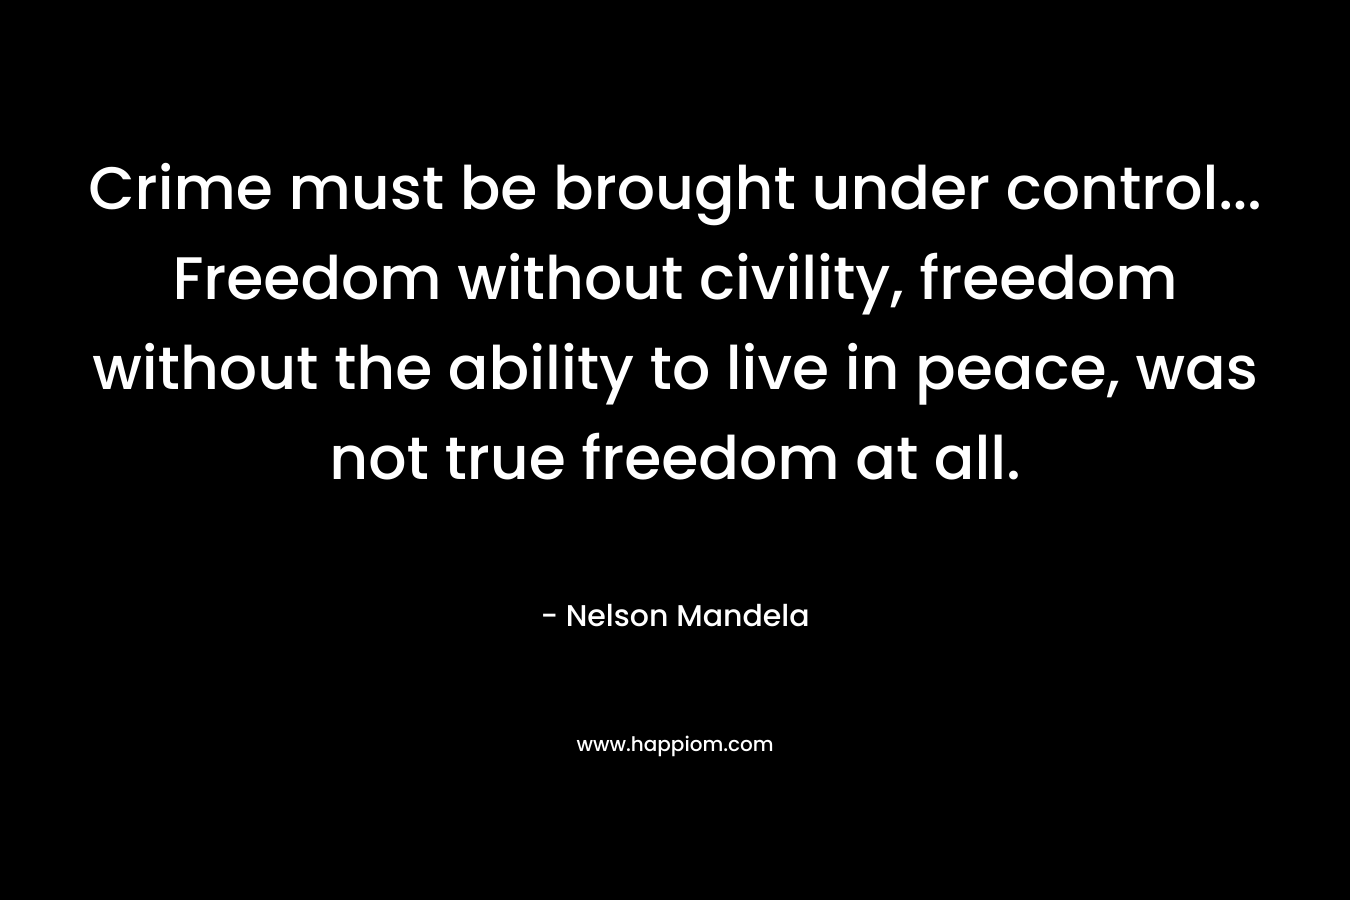 Crime must be brought under control... Freedom without civility, freedom without the ability to live in peace, was not true freedom at all.